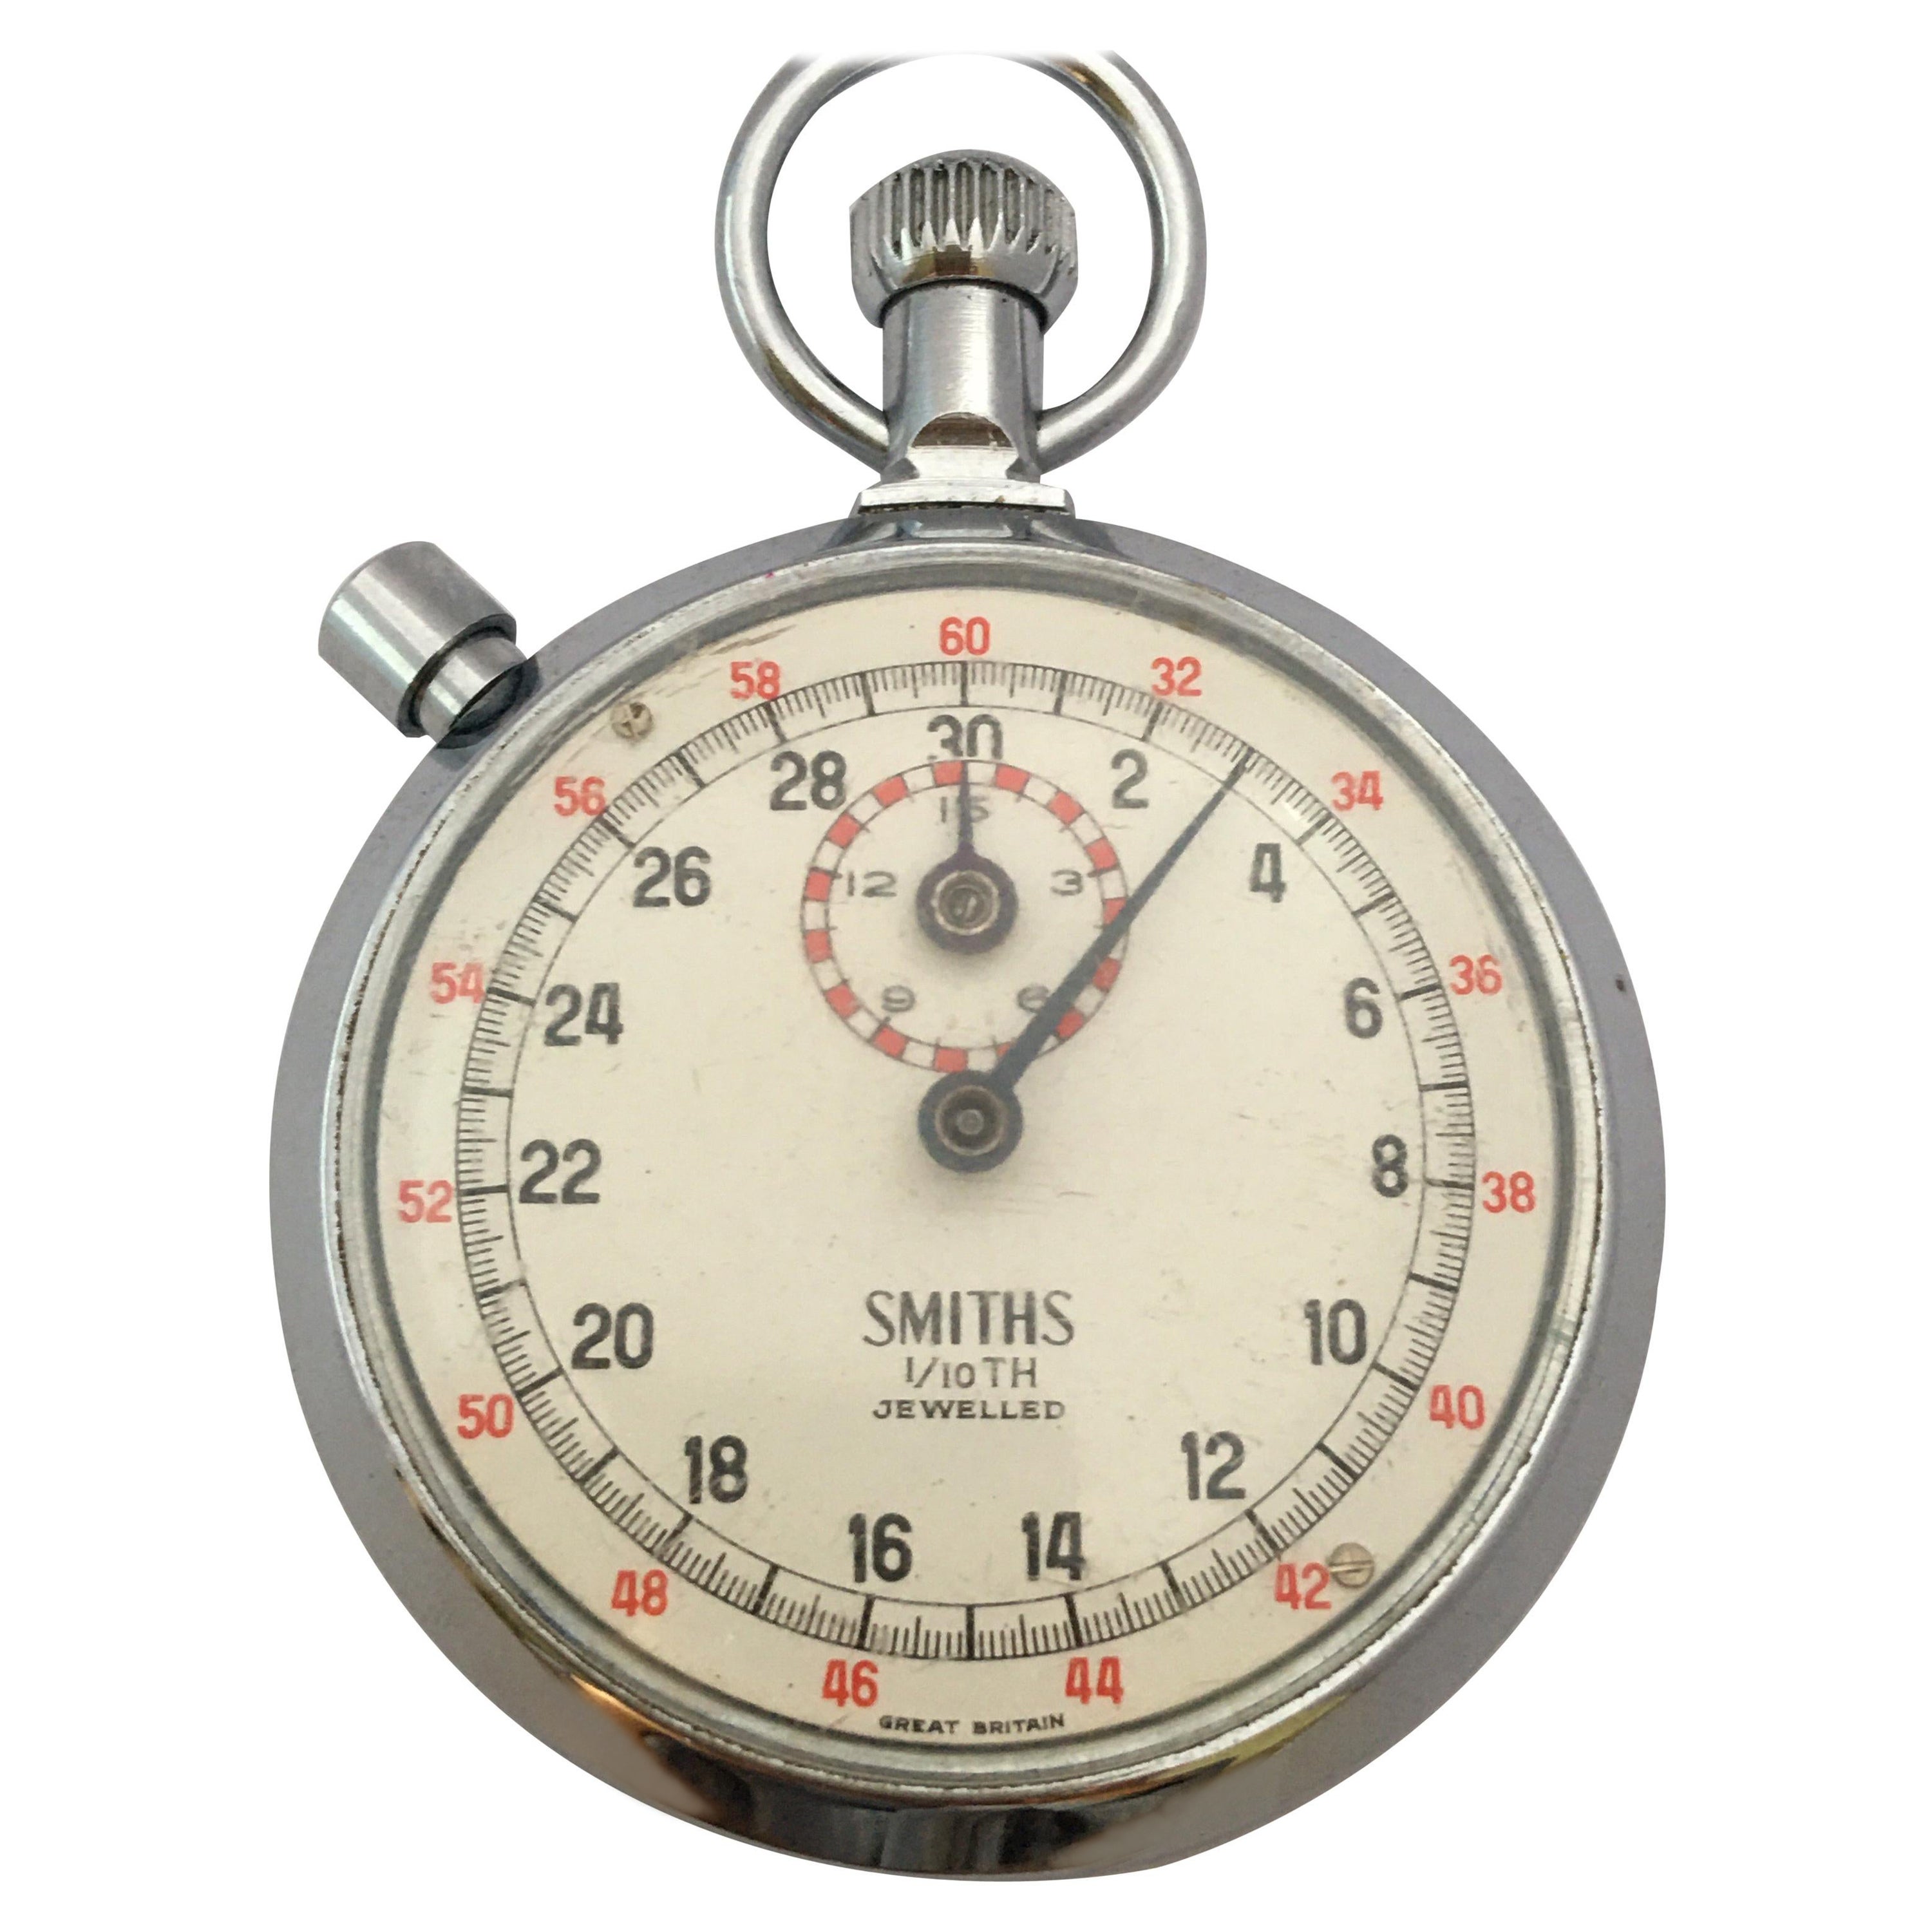 Smiths Sport Timer 1/10 TH Jewelled Stop Watch Handheld Fitness Sports For Sale